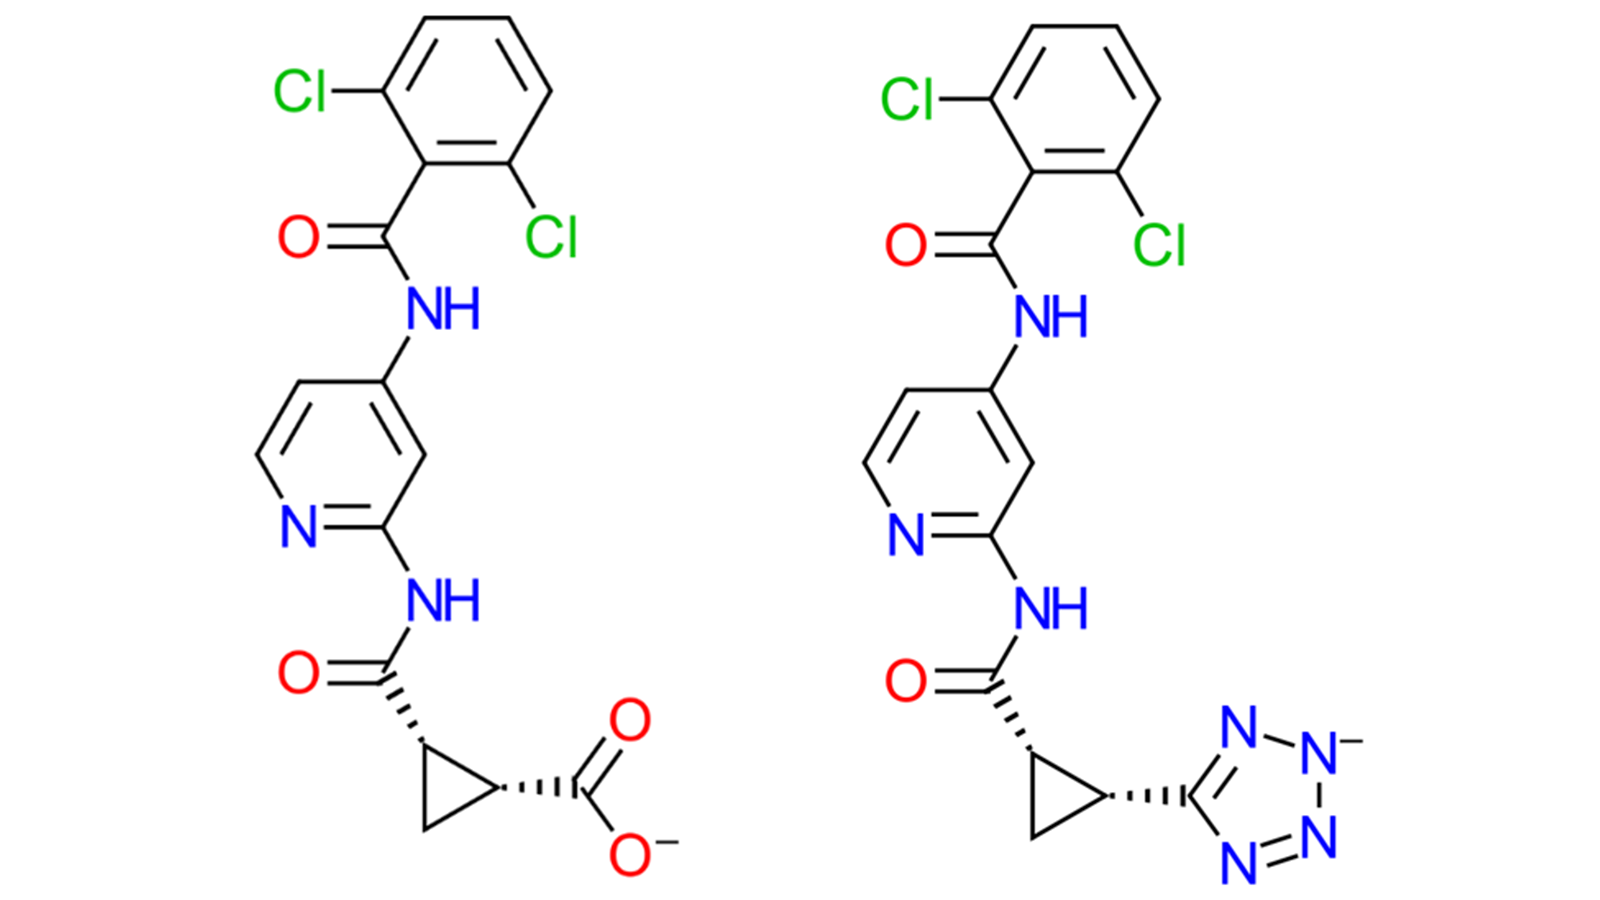 Figure 1 the two charged ligands from the TYK2 dataset